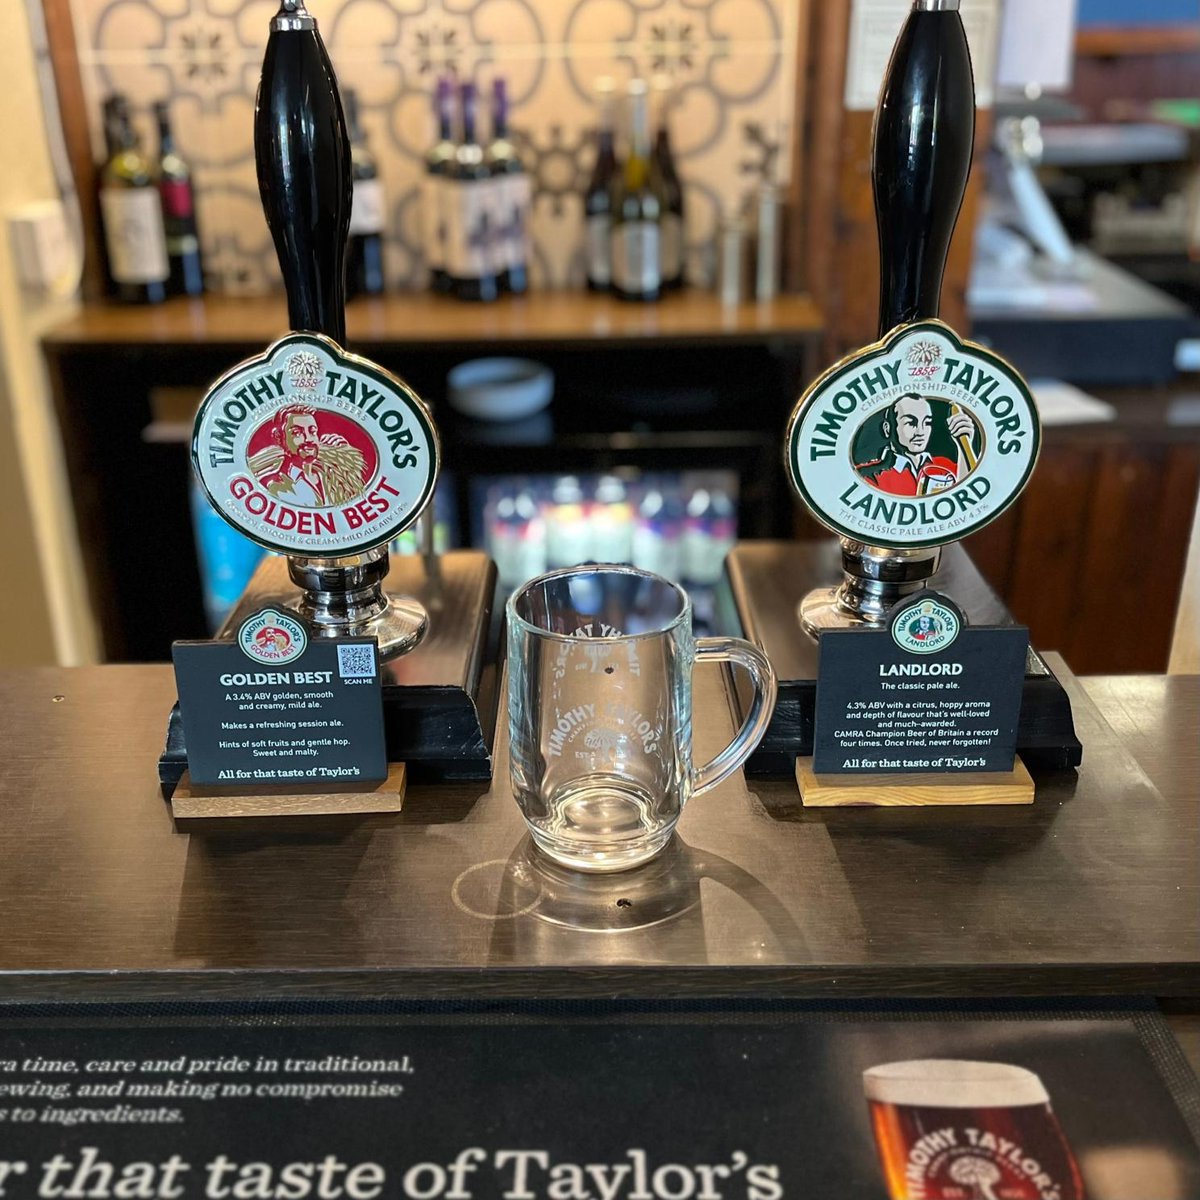 There's lots of love for Golden Best, Landlord and tankards at The White Horse, Marshchapel. Kris and Ellen are taking good care of our beers.